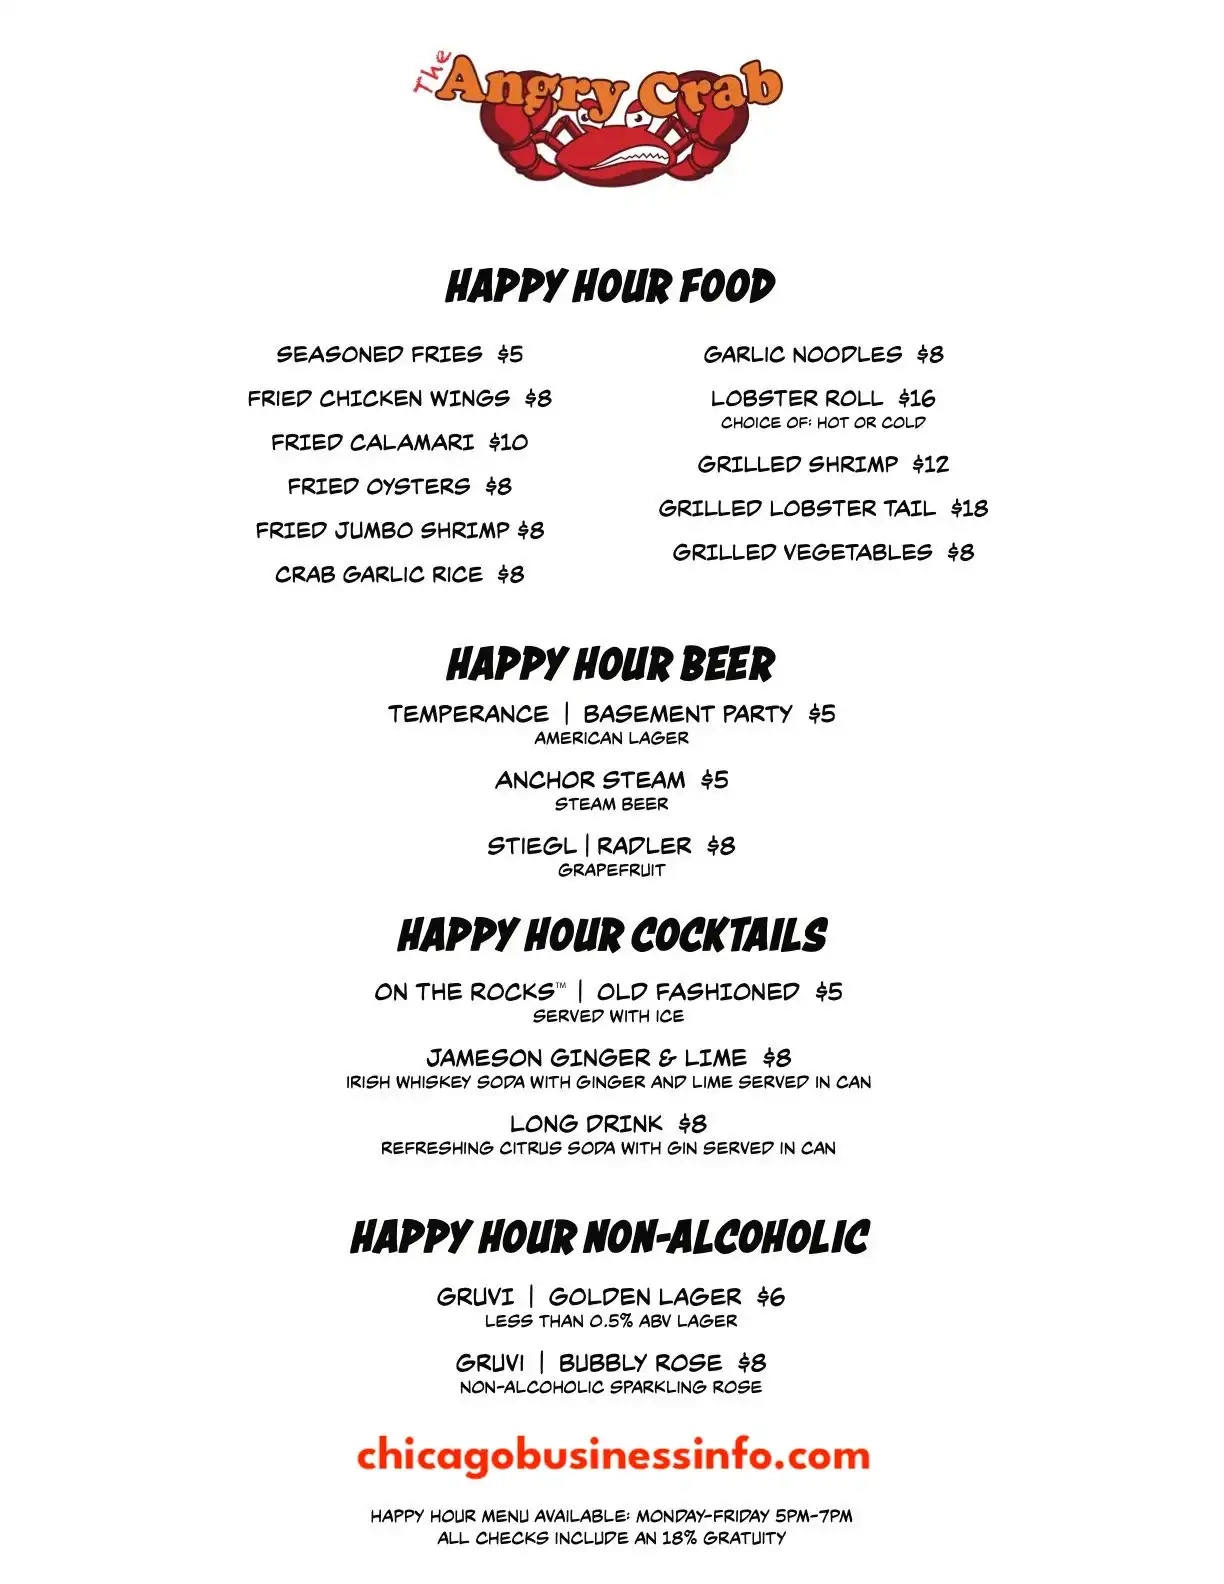 The Angry Crab Chicago Happy Hour Menu